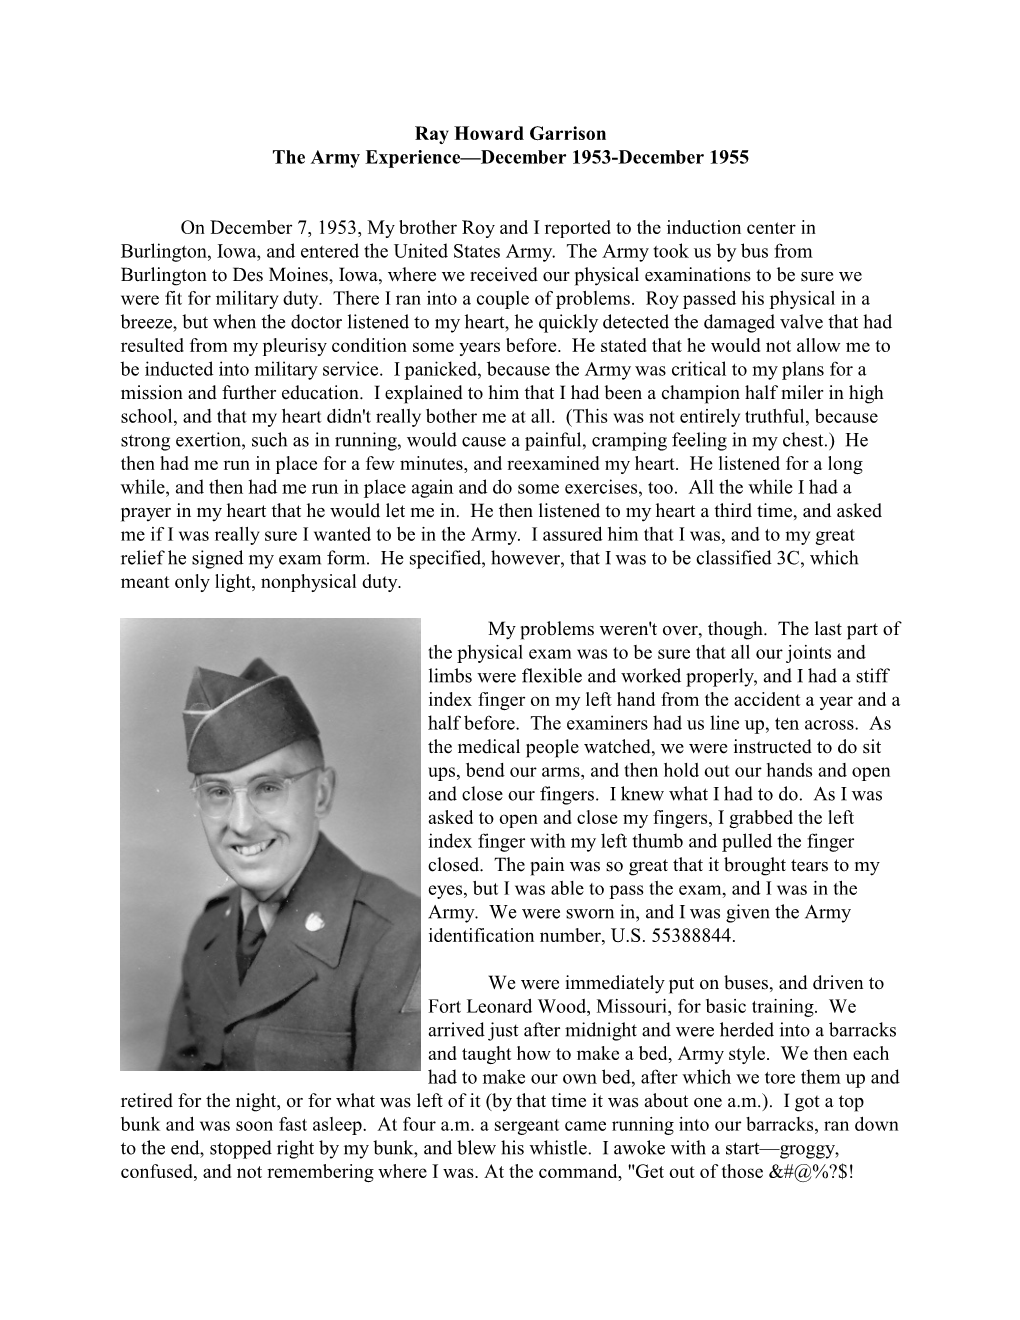 Ray Howard Garrison the Army Experience—December 1953-December 1955